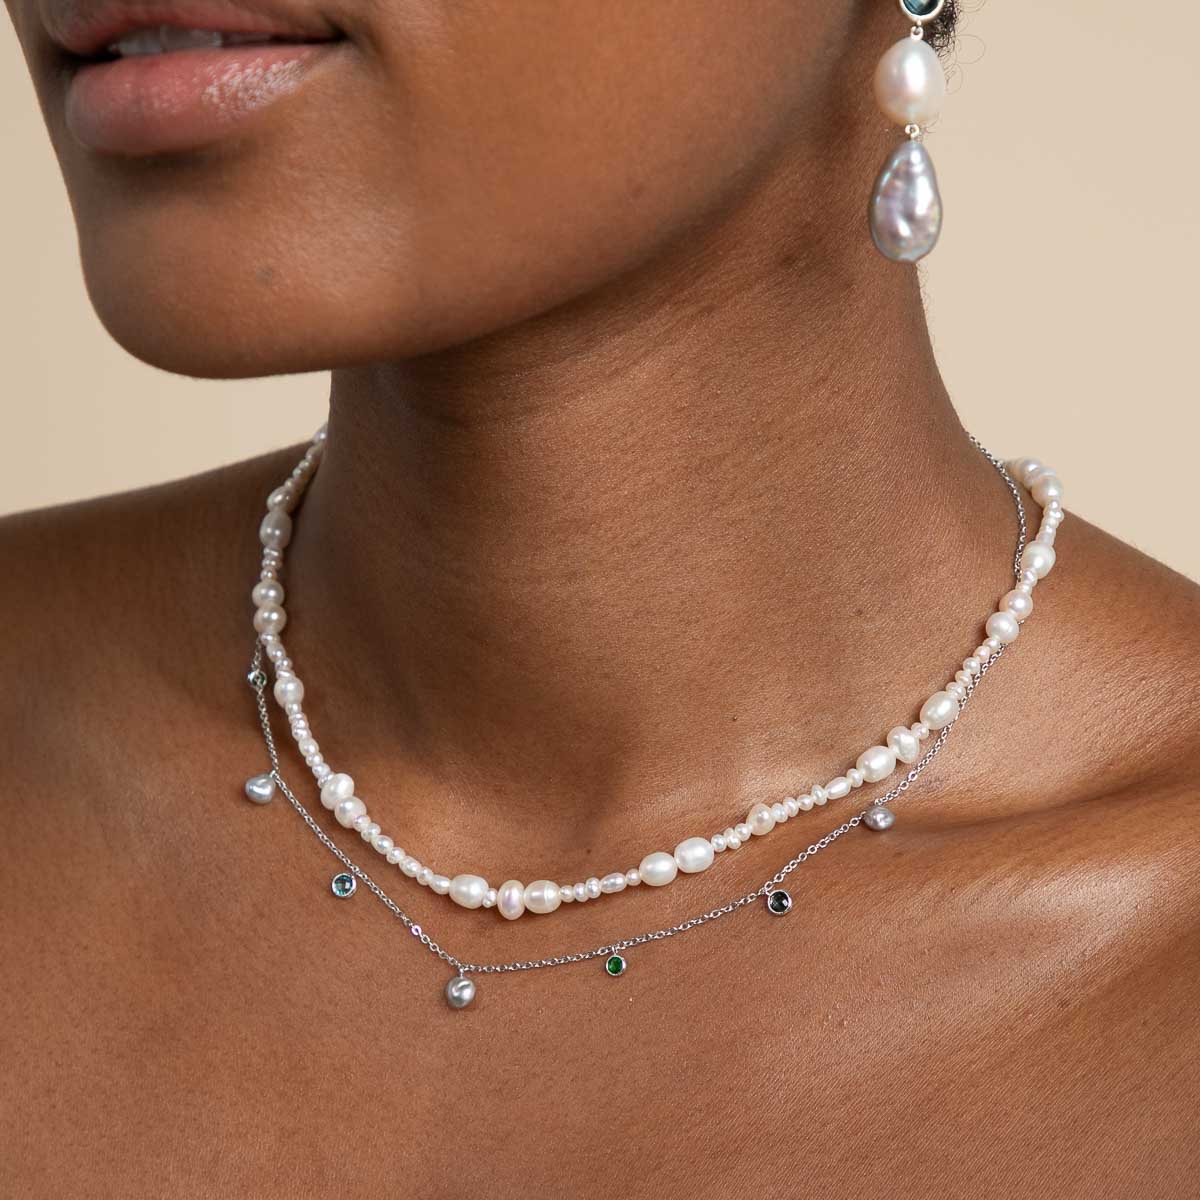 Tranquility Pearl Charm Necklace in Silver